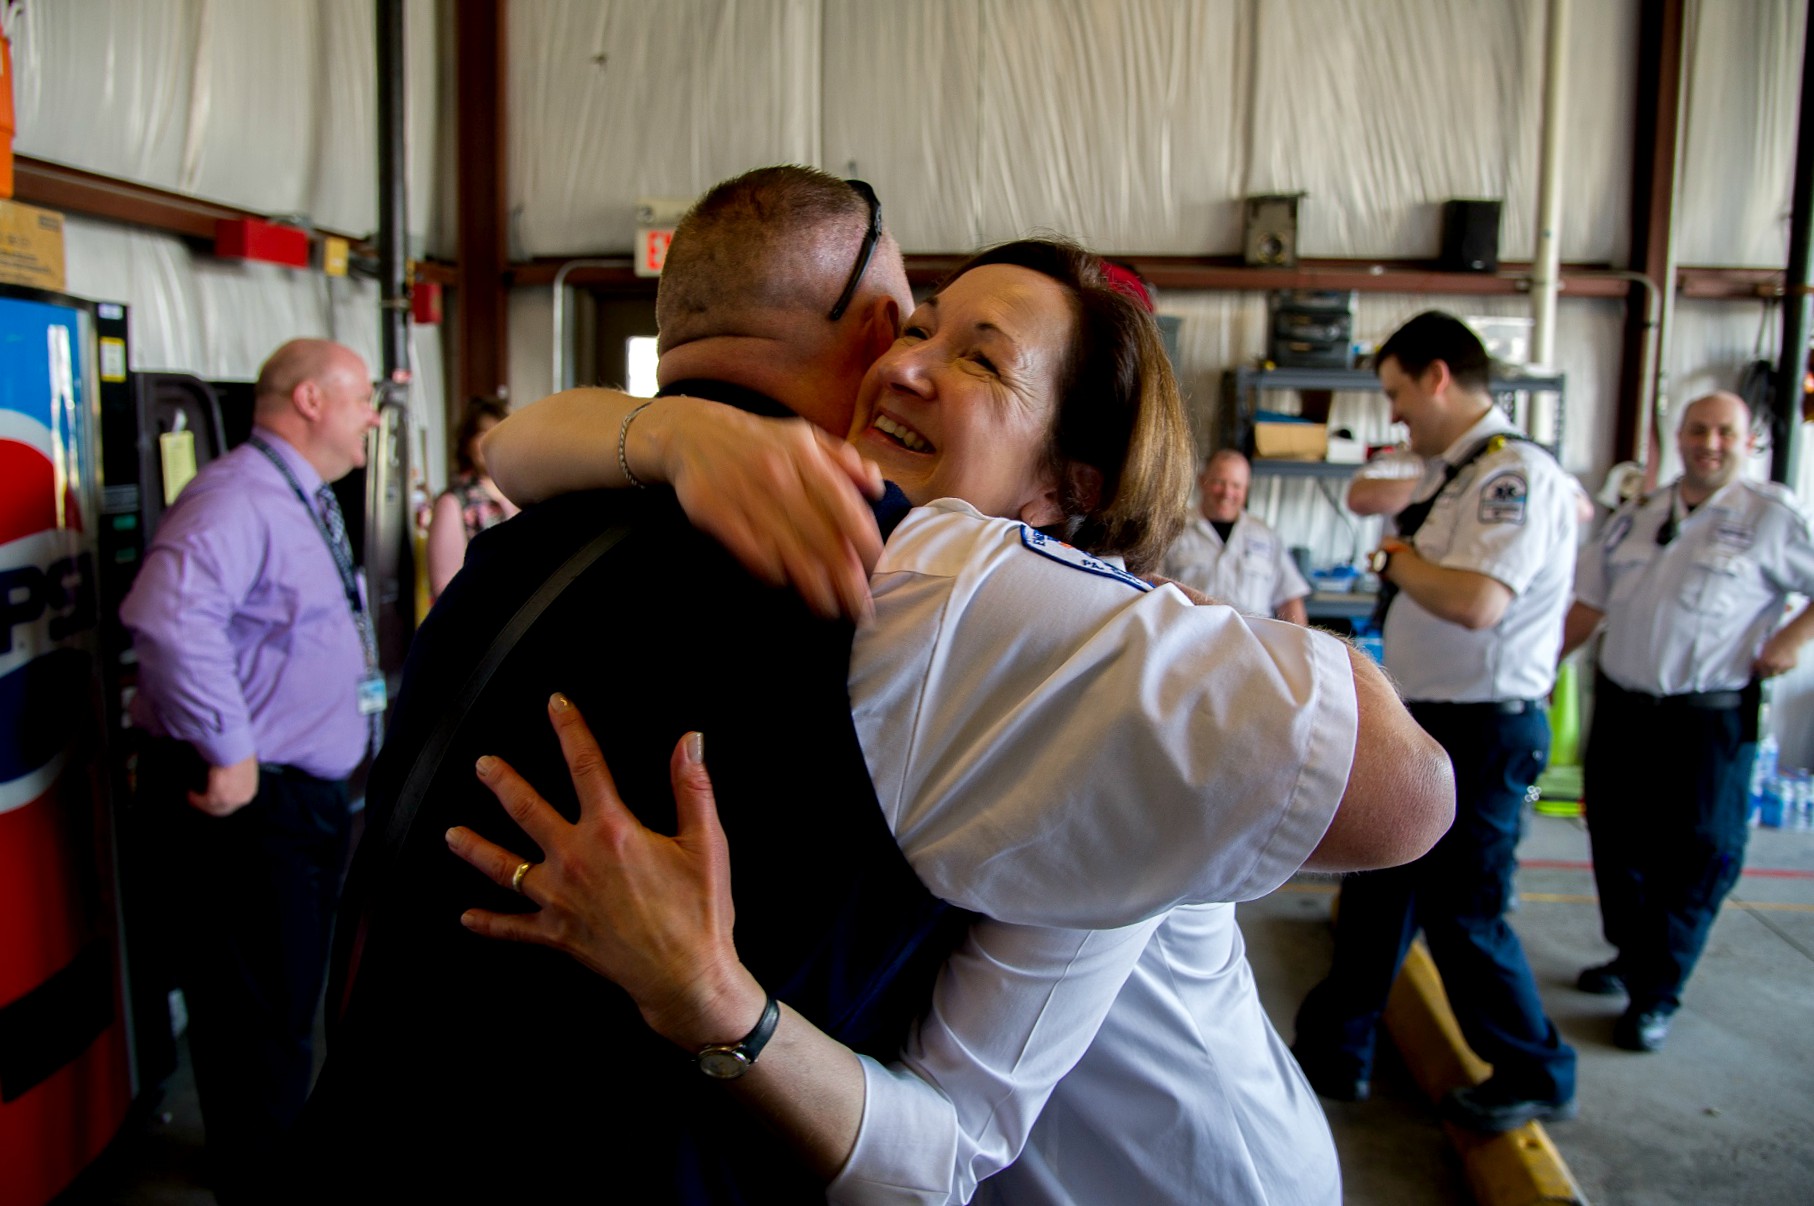 Cardiac arrest survivor Marty Woodfin smiles as she hugs Life Lion Paramedic Jeff Gewertz in the Life Lion garage. In the background, other paramedics smile and talk.